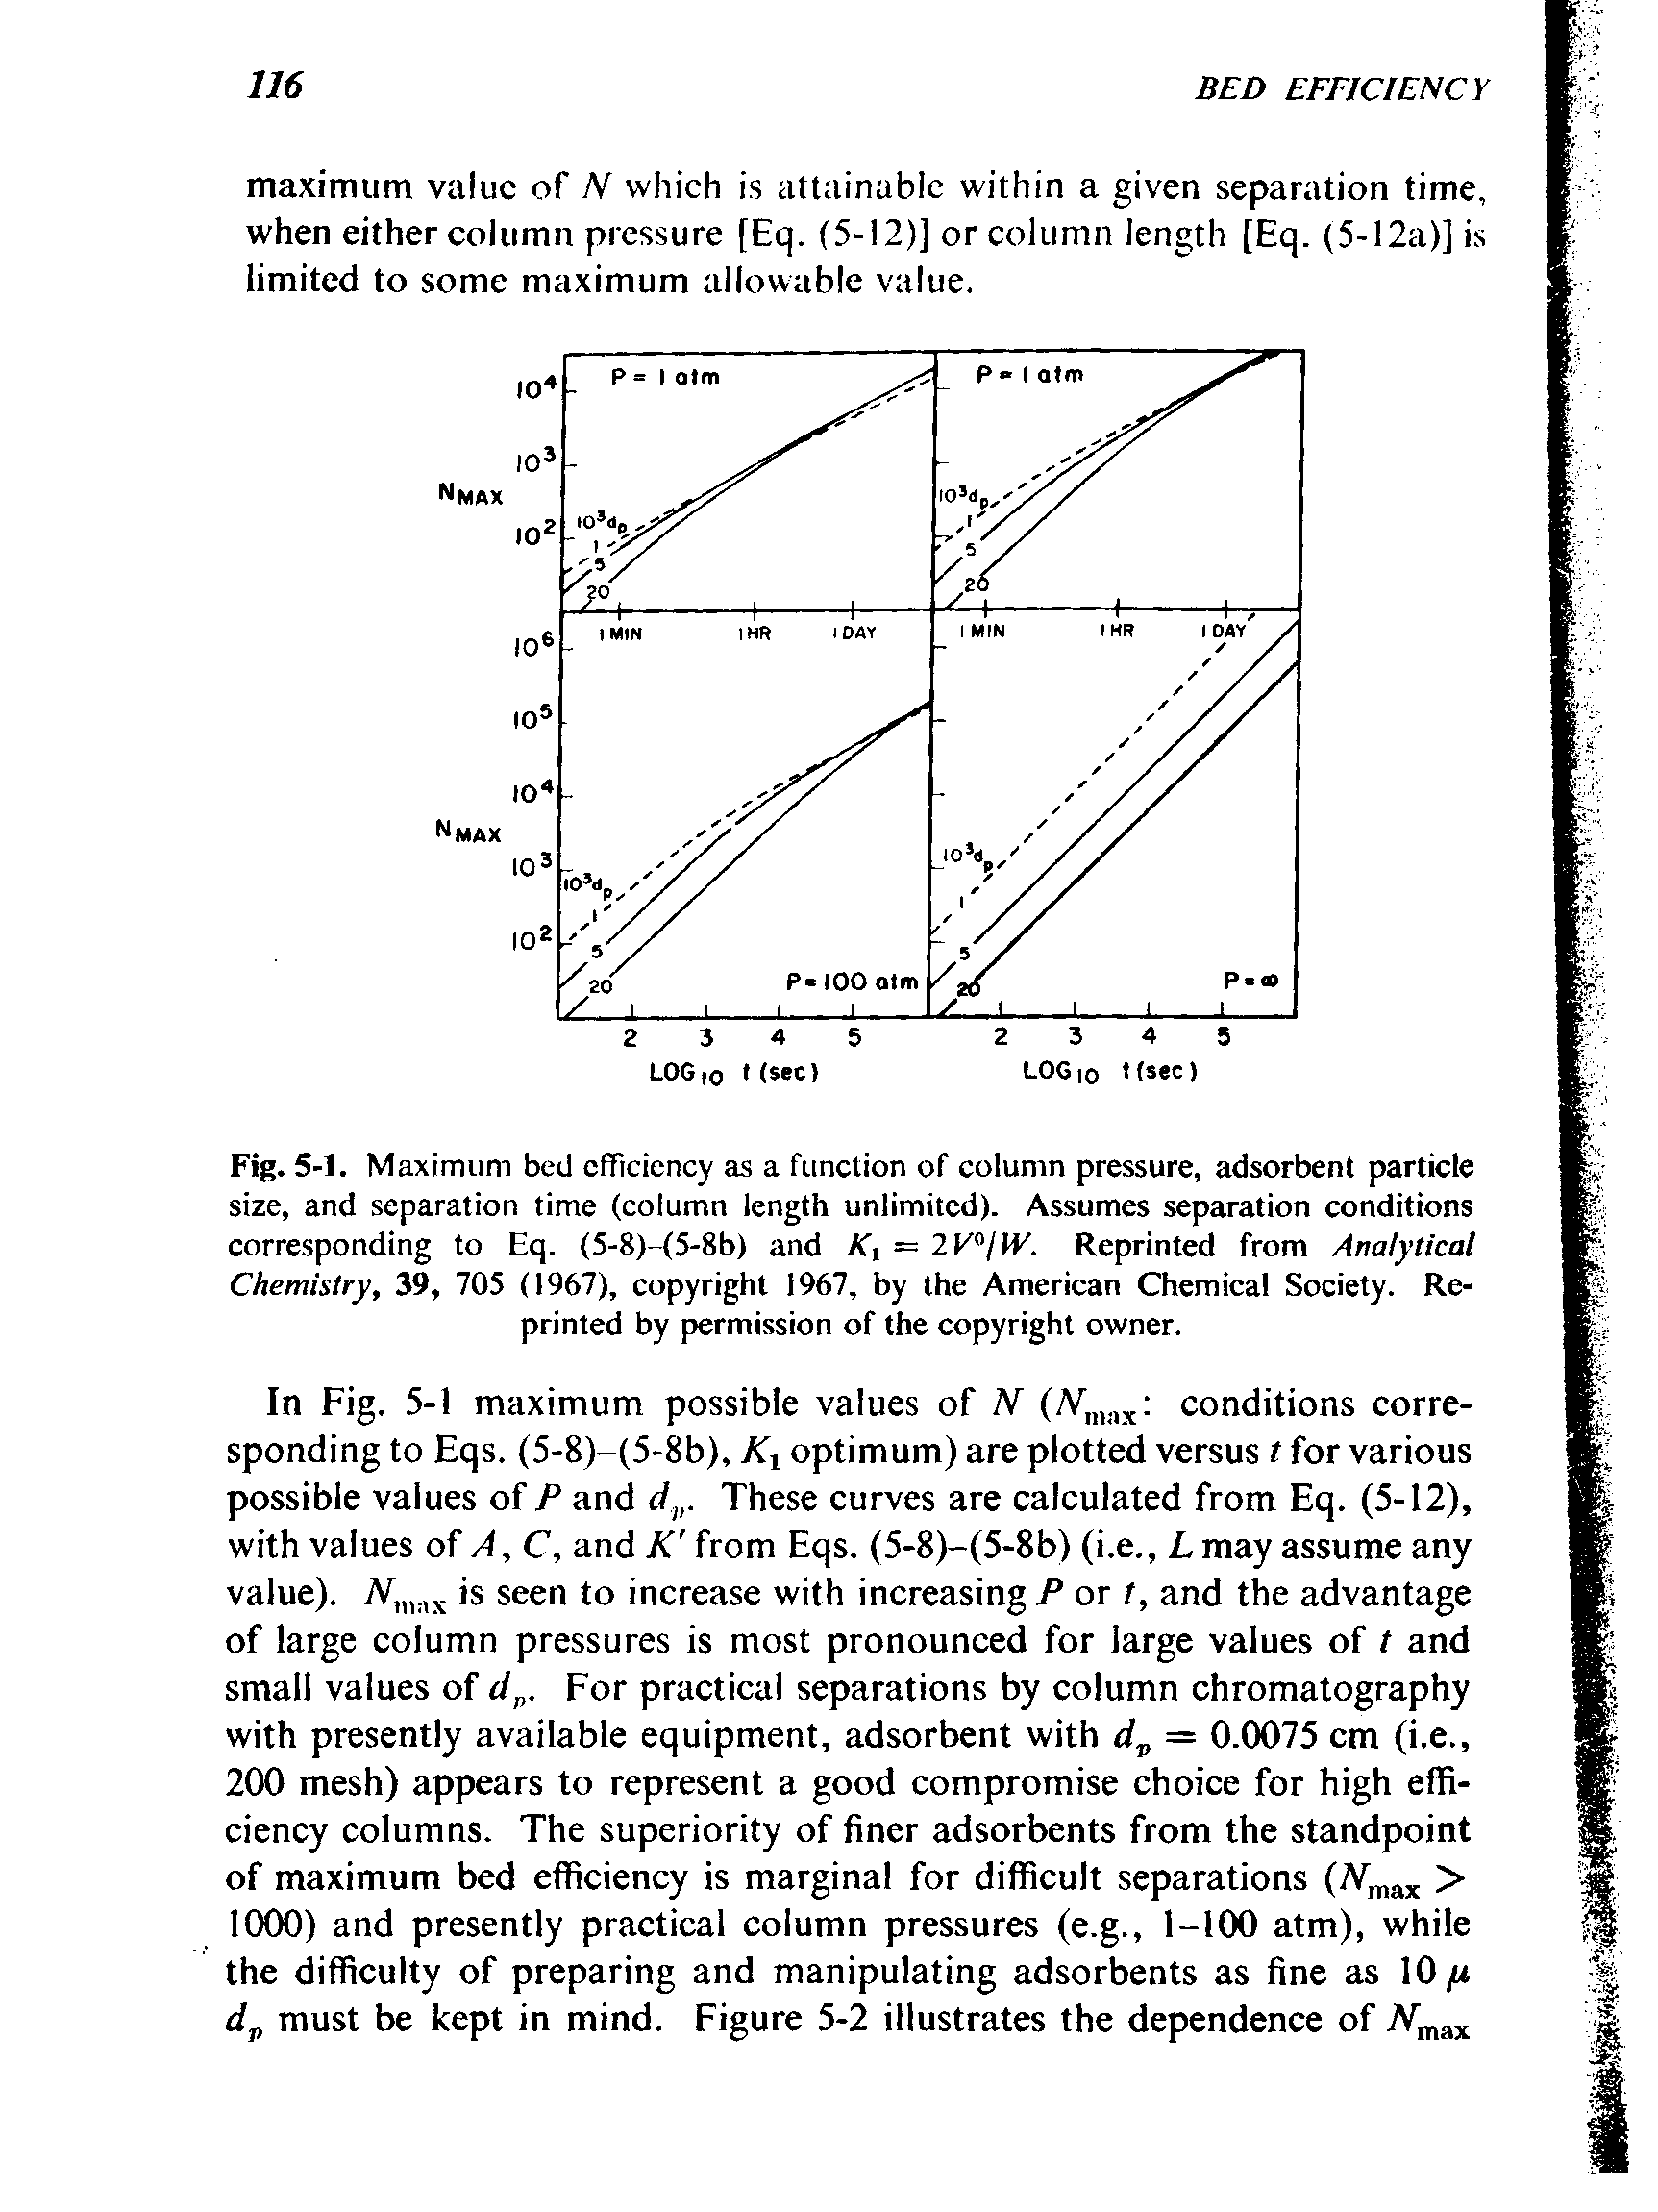 Fig. 5-1. Maximum bed efficiency as a function of column pressure, adsorbent particle size, and separation time (column length unlimited). Assumes separation conditions corresponding to Eq. (5-8)- 5-8b) and /C, = 2V jW. Reprinted from Analytical Chemistry, 39, 705 (1967), copyright 1967, by the American Chemical Society. Reprinted by permission of the copyright owner.